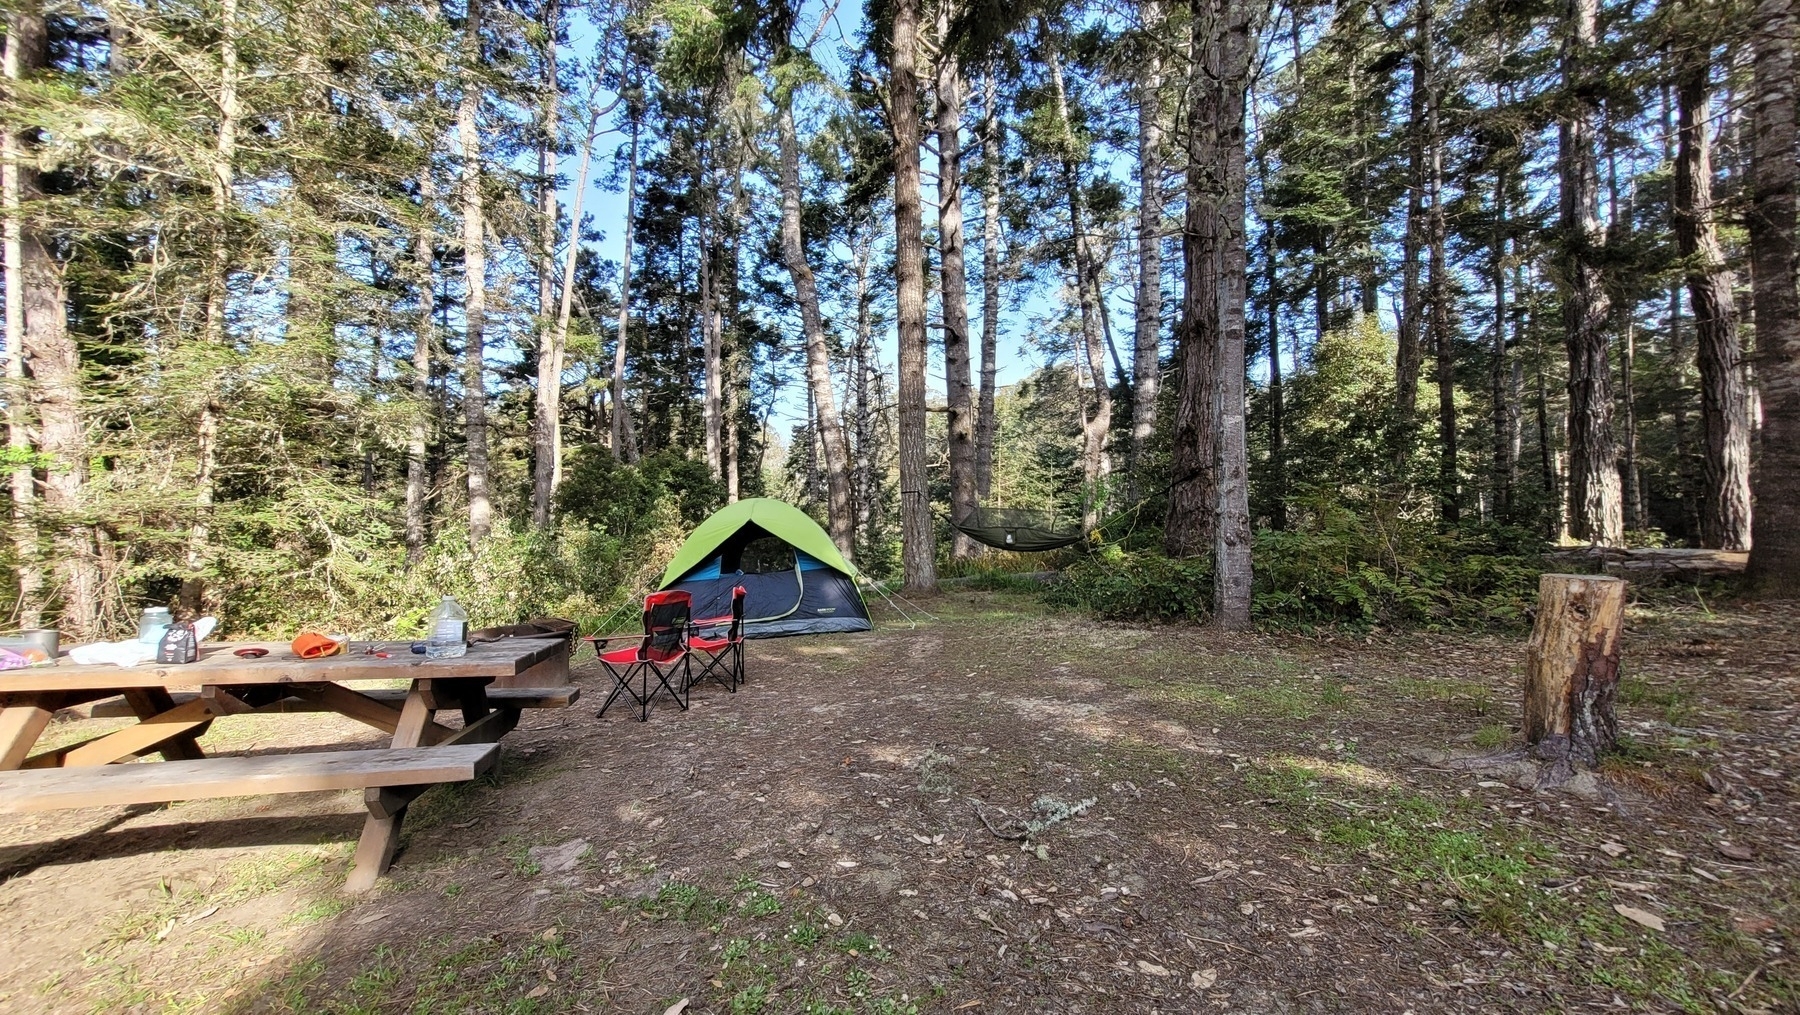 Our Campsite, Van Damme State Park, Fort Bragg, CA